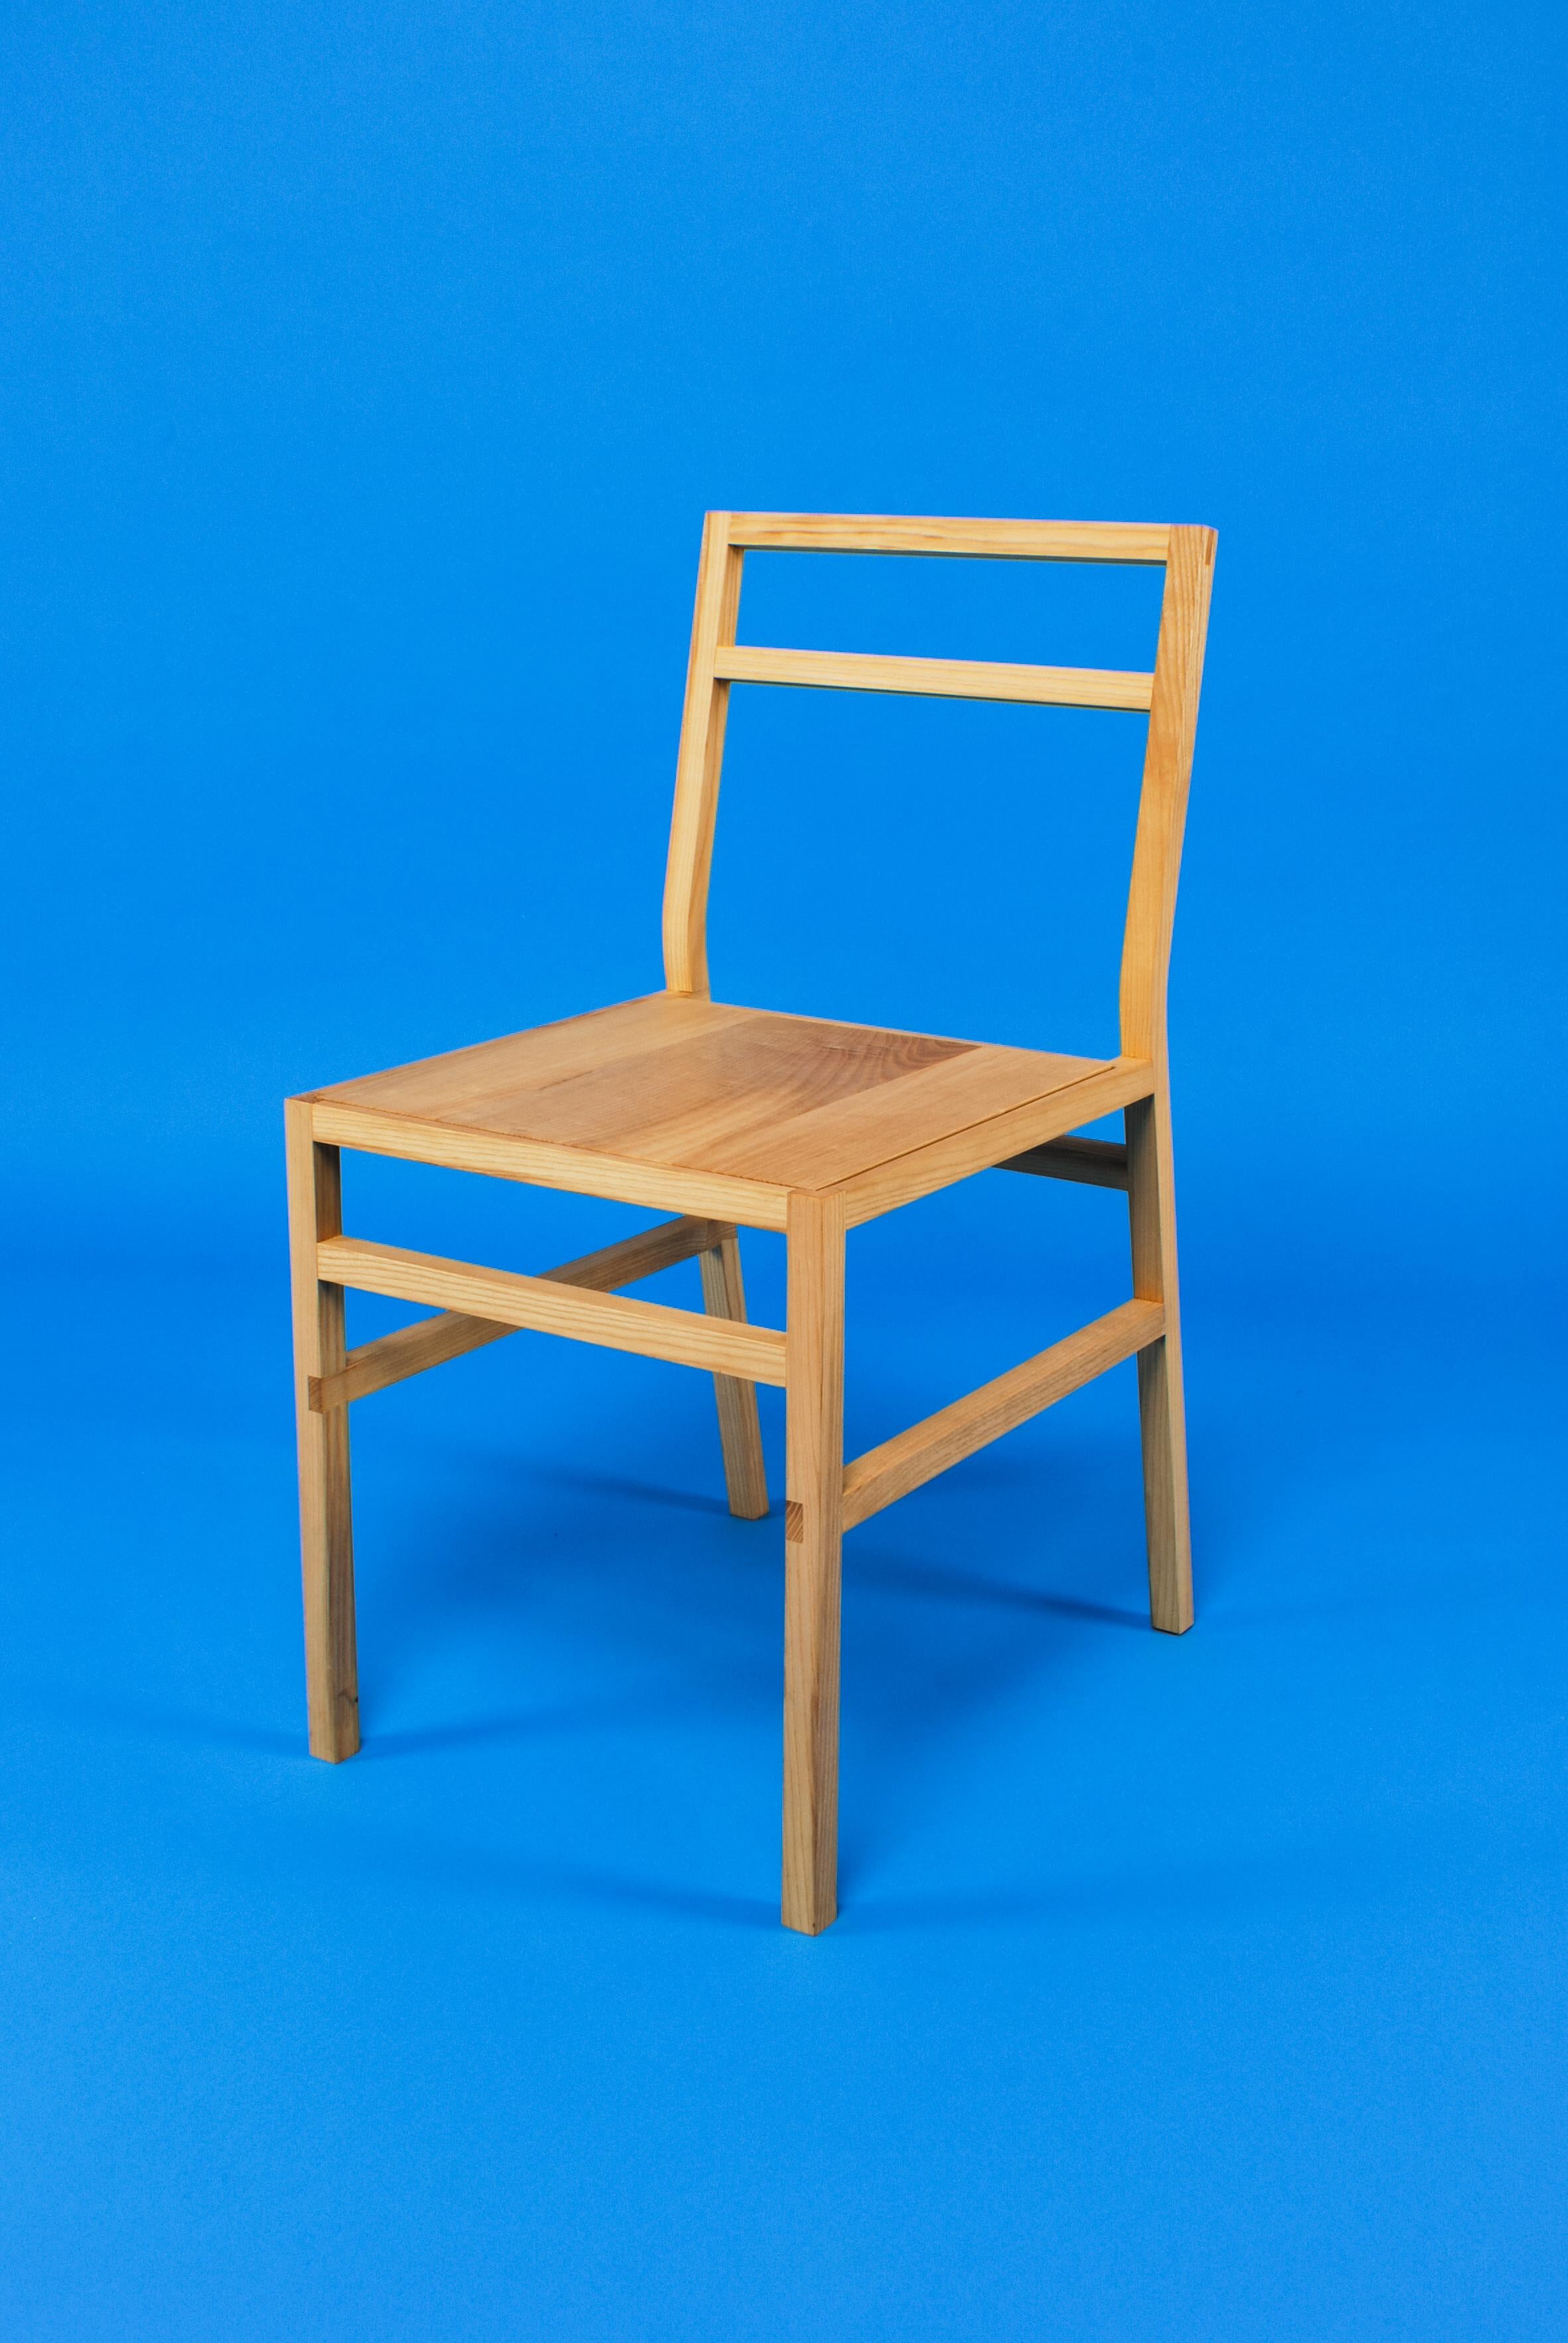 Organic Modern Dining Chair. Created by Loose Fit and handmade to order in the UK. Available in a choice of three timbers - English Oak, Ash or London Plane.

Simple Ash Dining Chair. Delicate in appearance yet comfortable and durable enough for